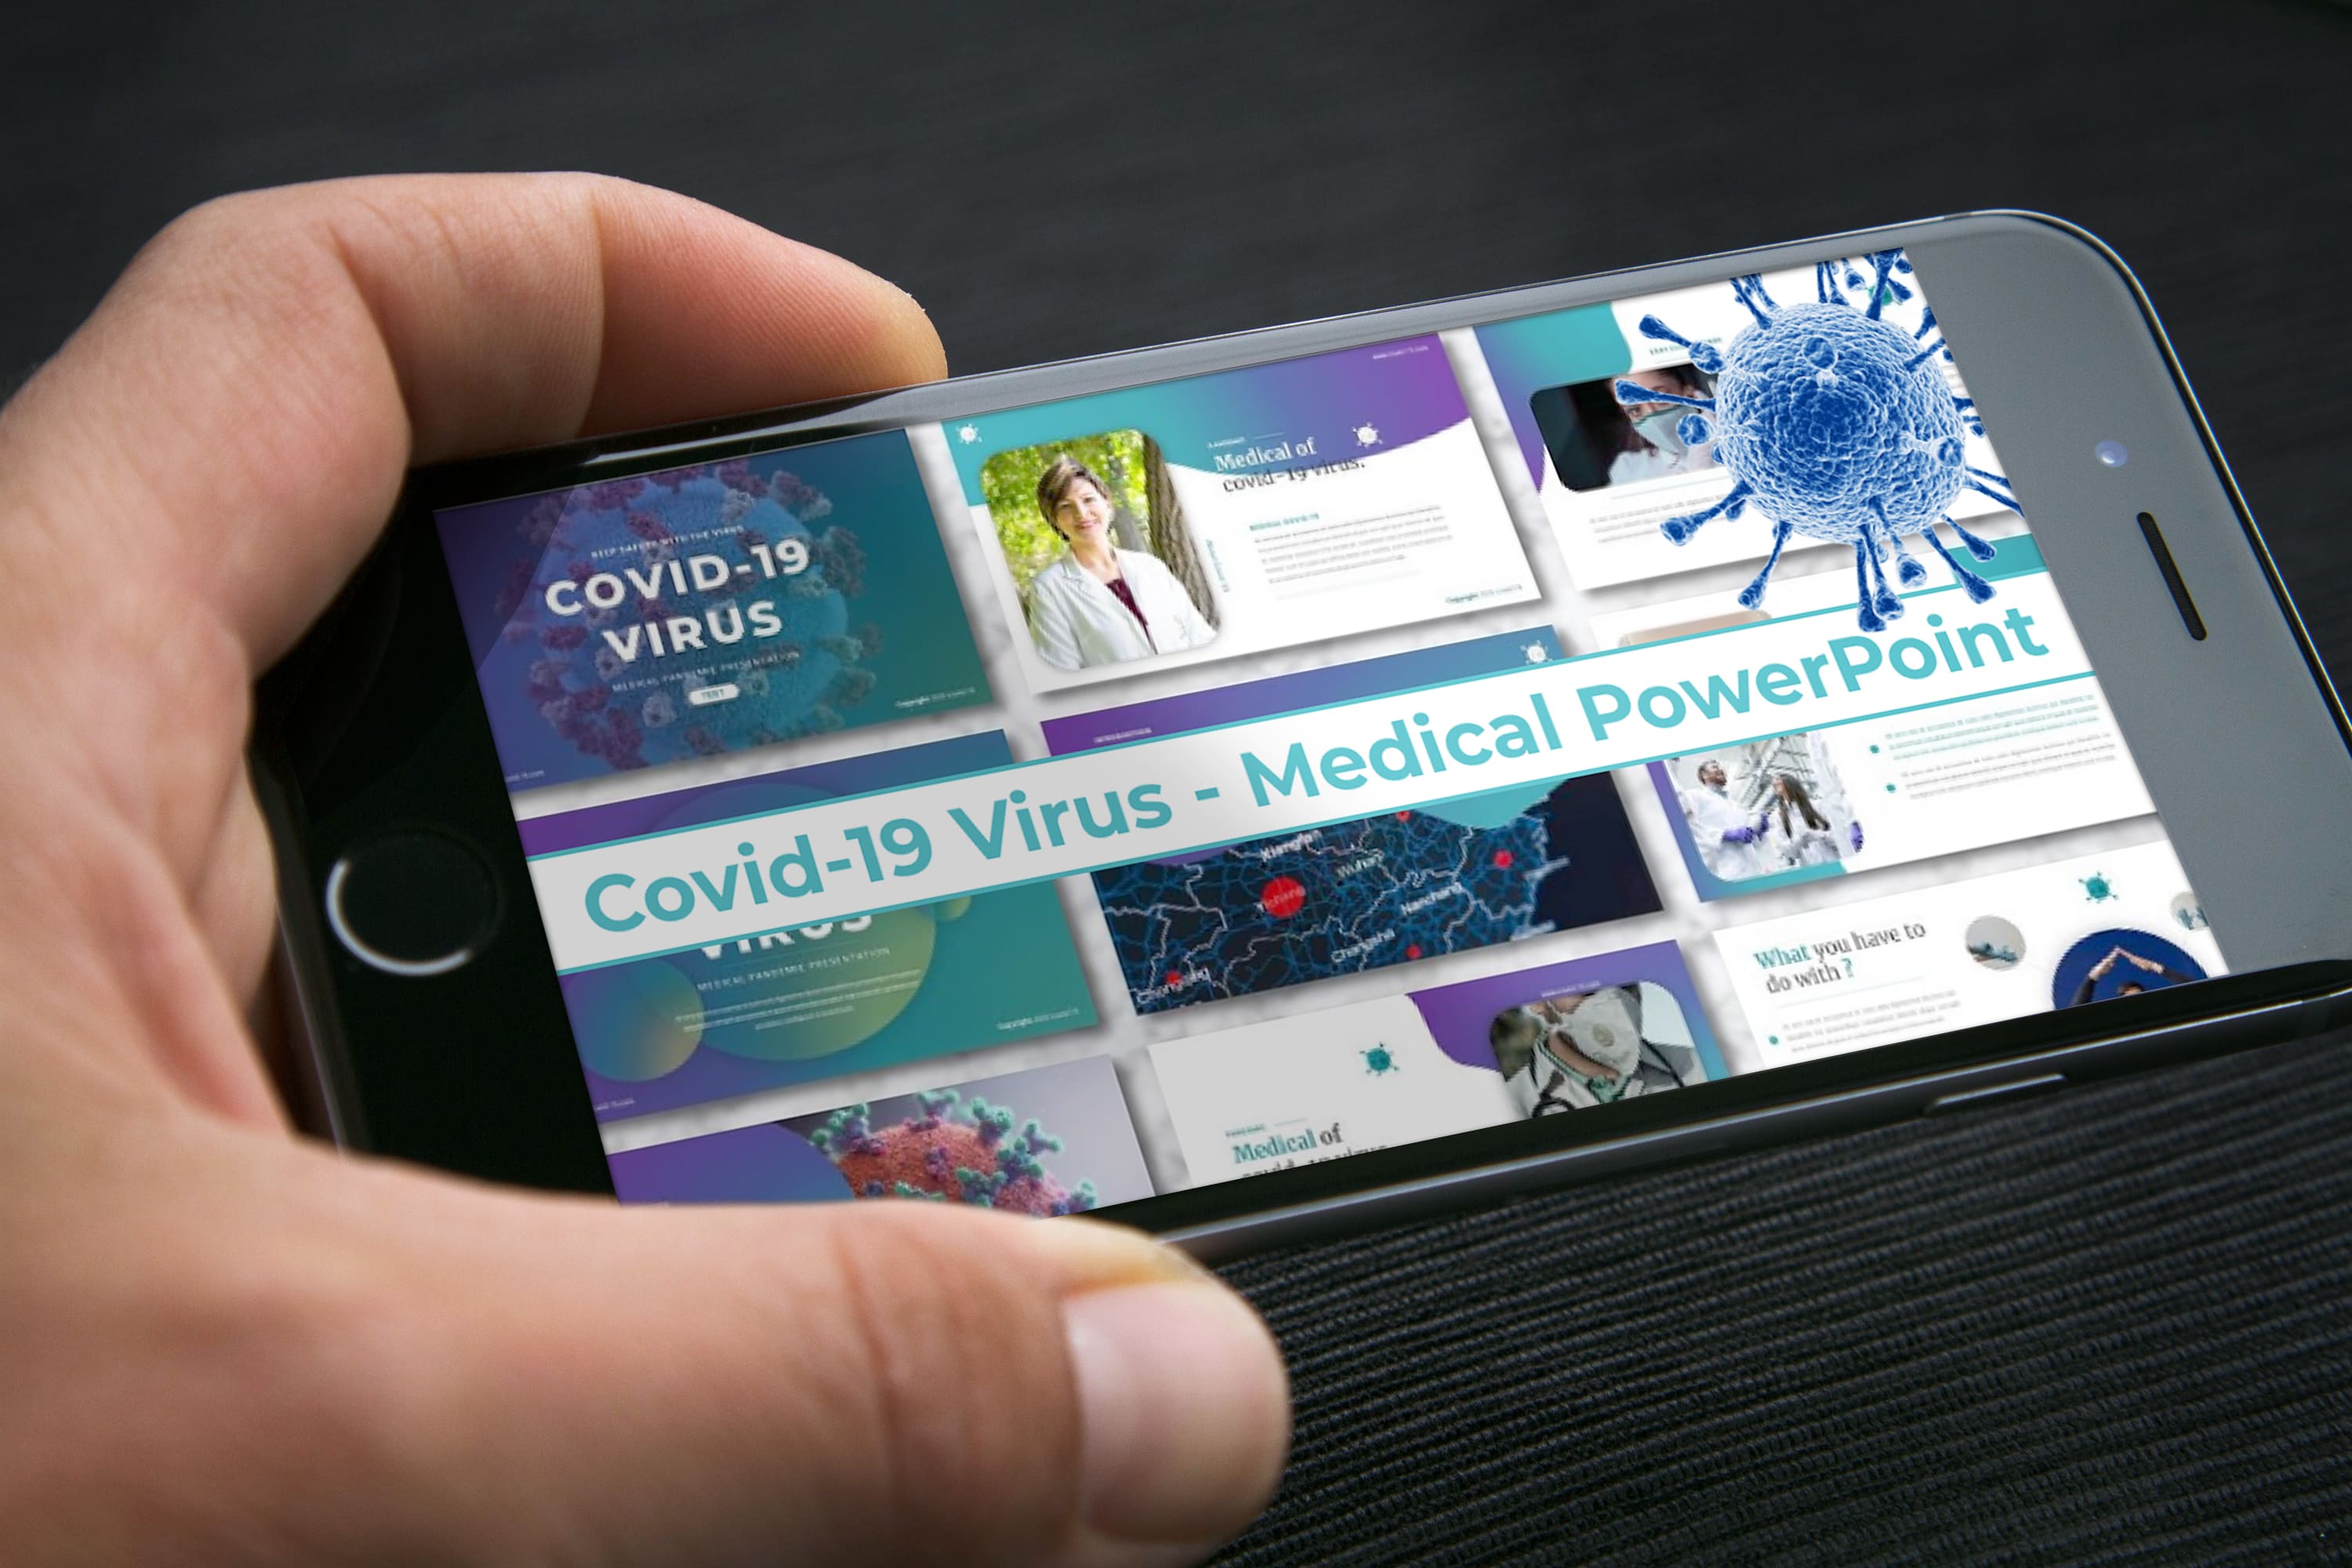 Mobile option of the Covid-19 Virus - Medical PowerPoint.